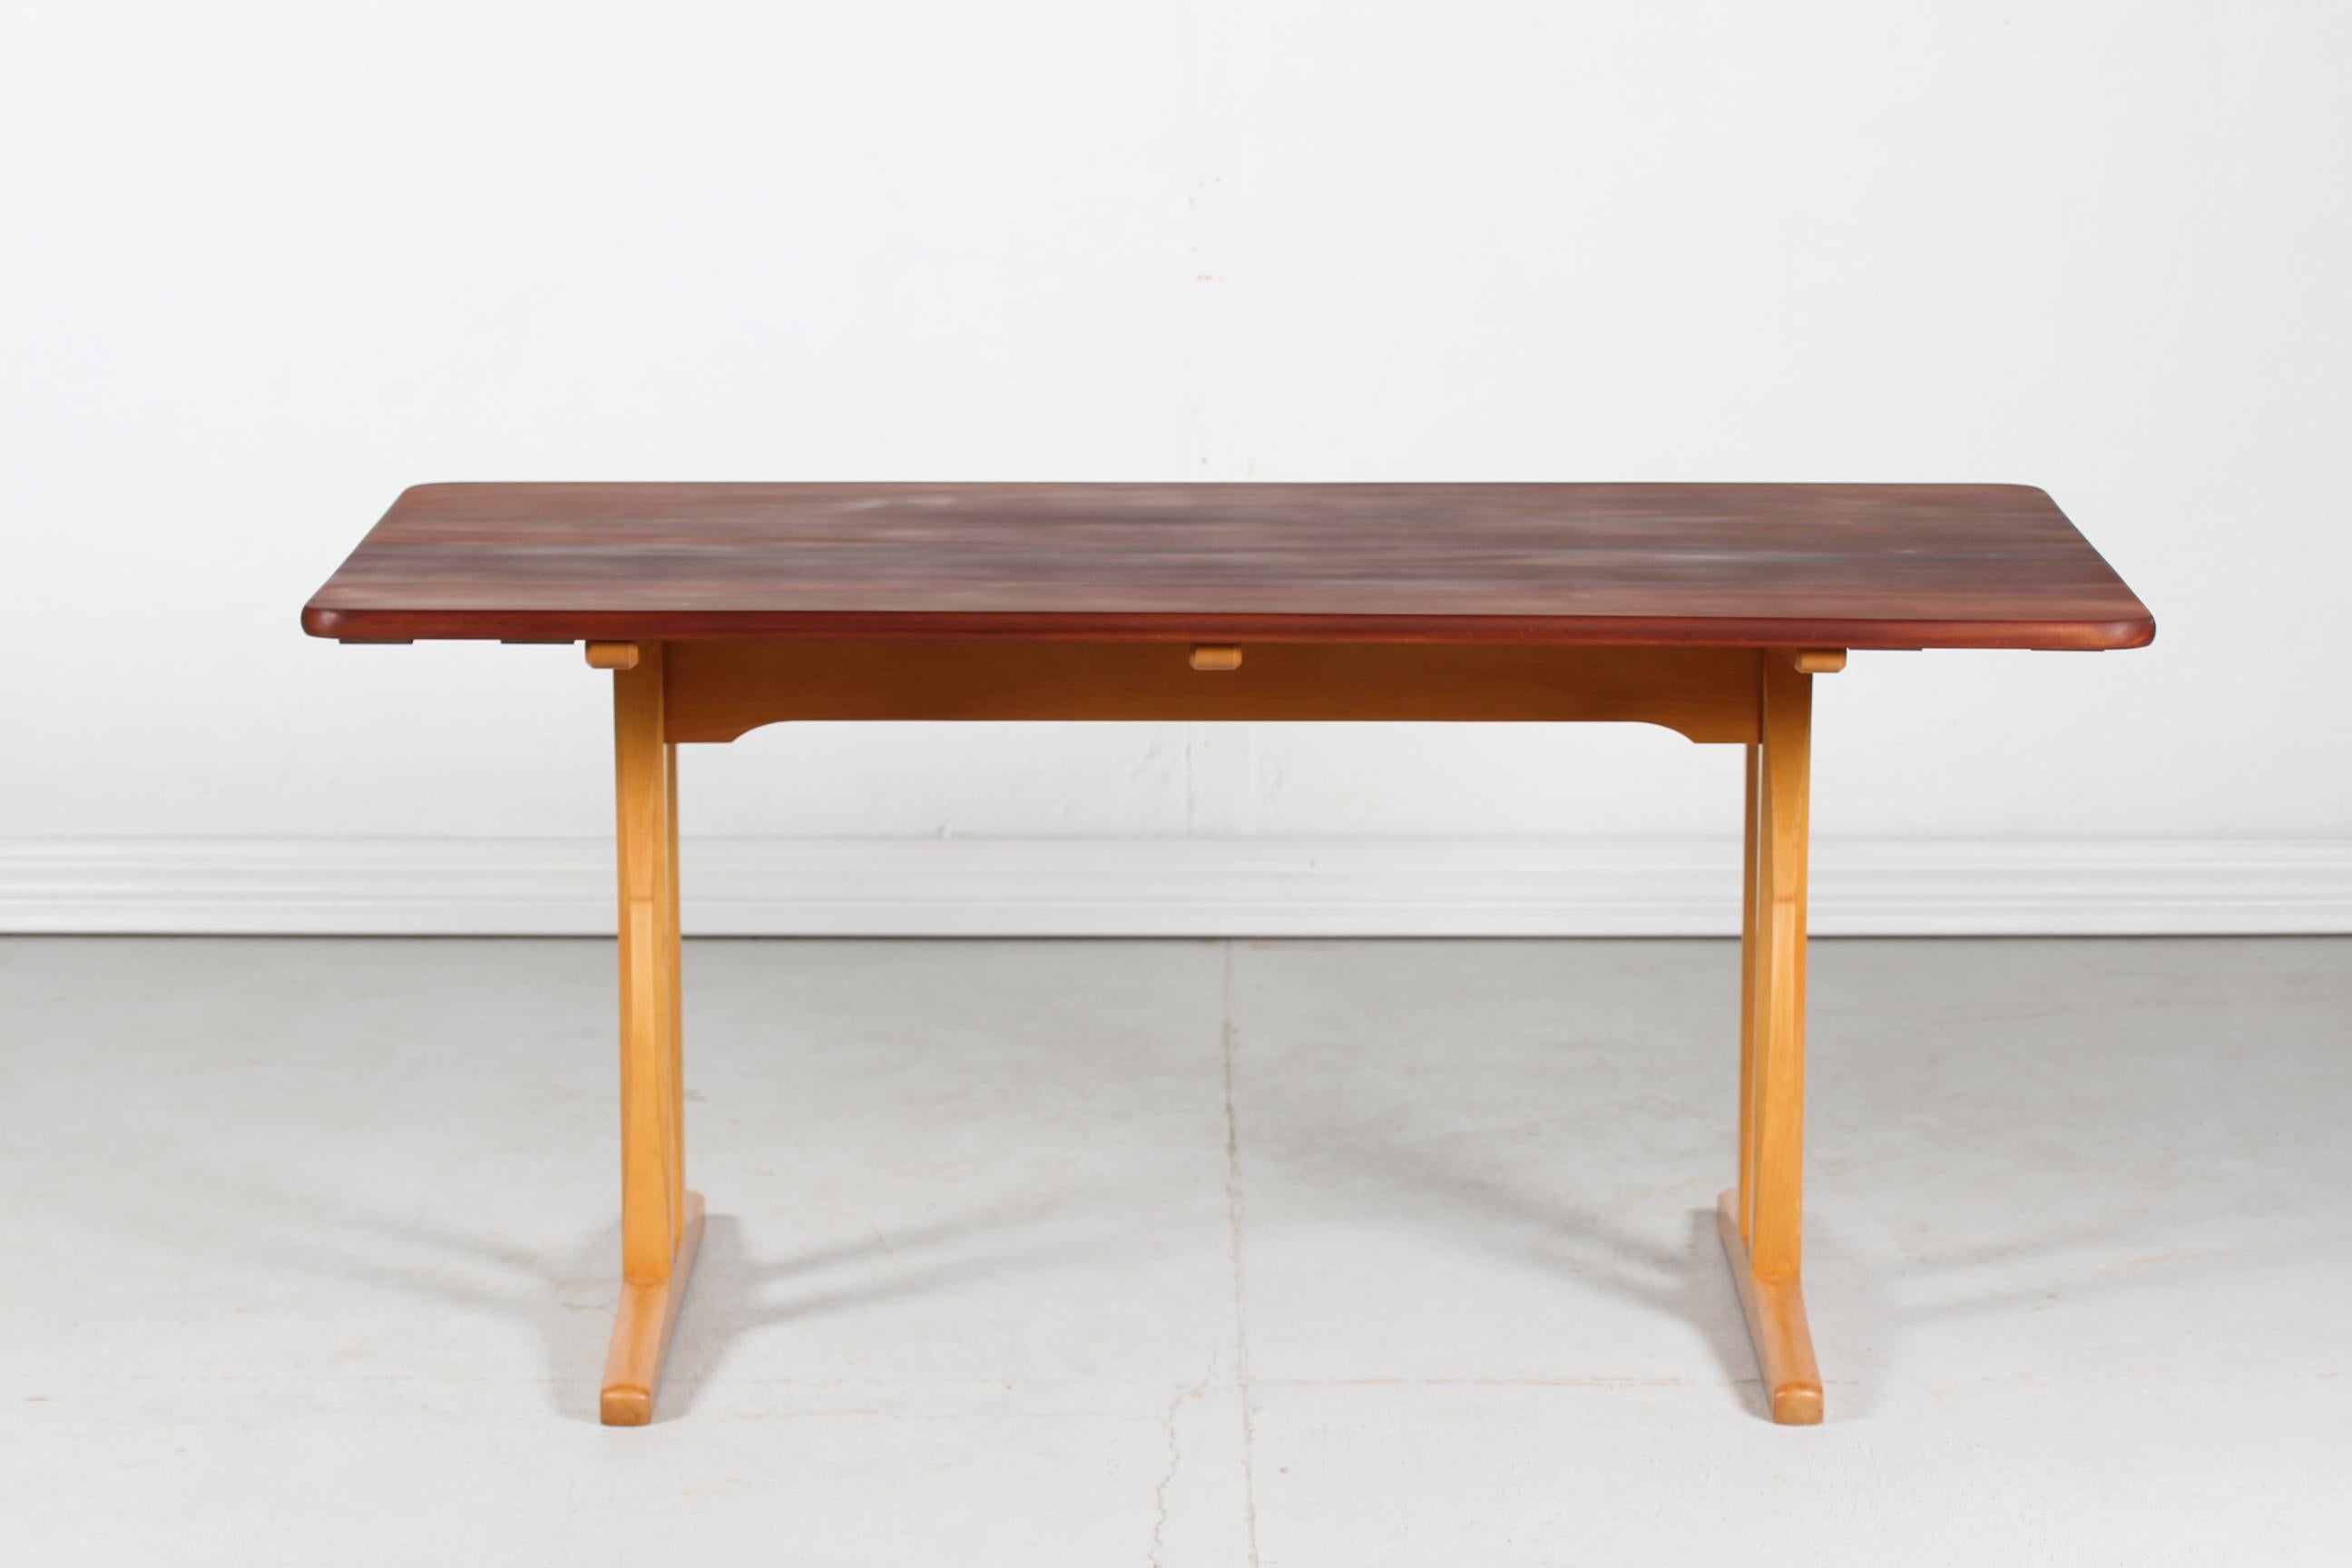 Rare danish vintage Børge Mogensen shaker table model C 18 made by the Danish furniture manufacturer FBD Møbler 
The model C 18 was designed in 1947 and made in the 1950s

The tabletop is made of oil treated solid teak and the frame is of beech with